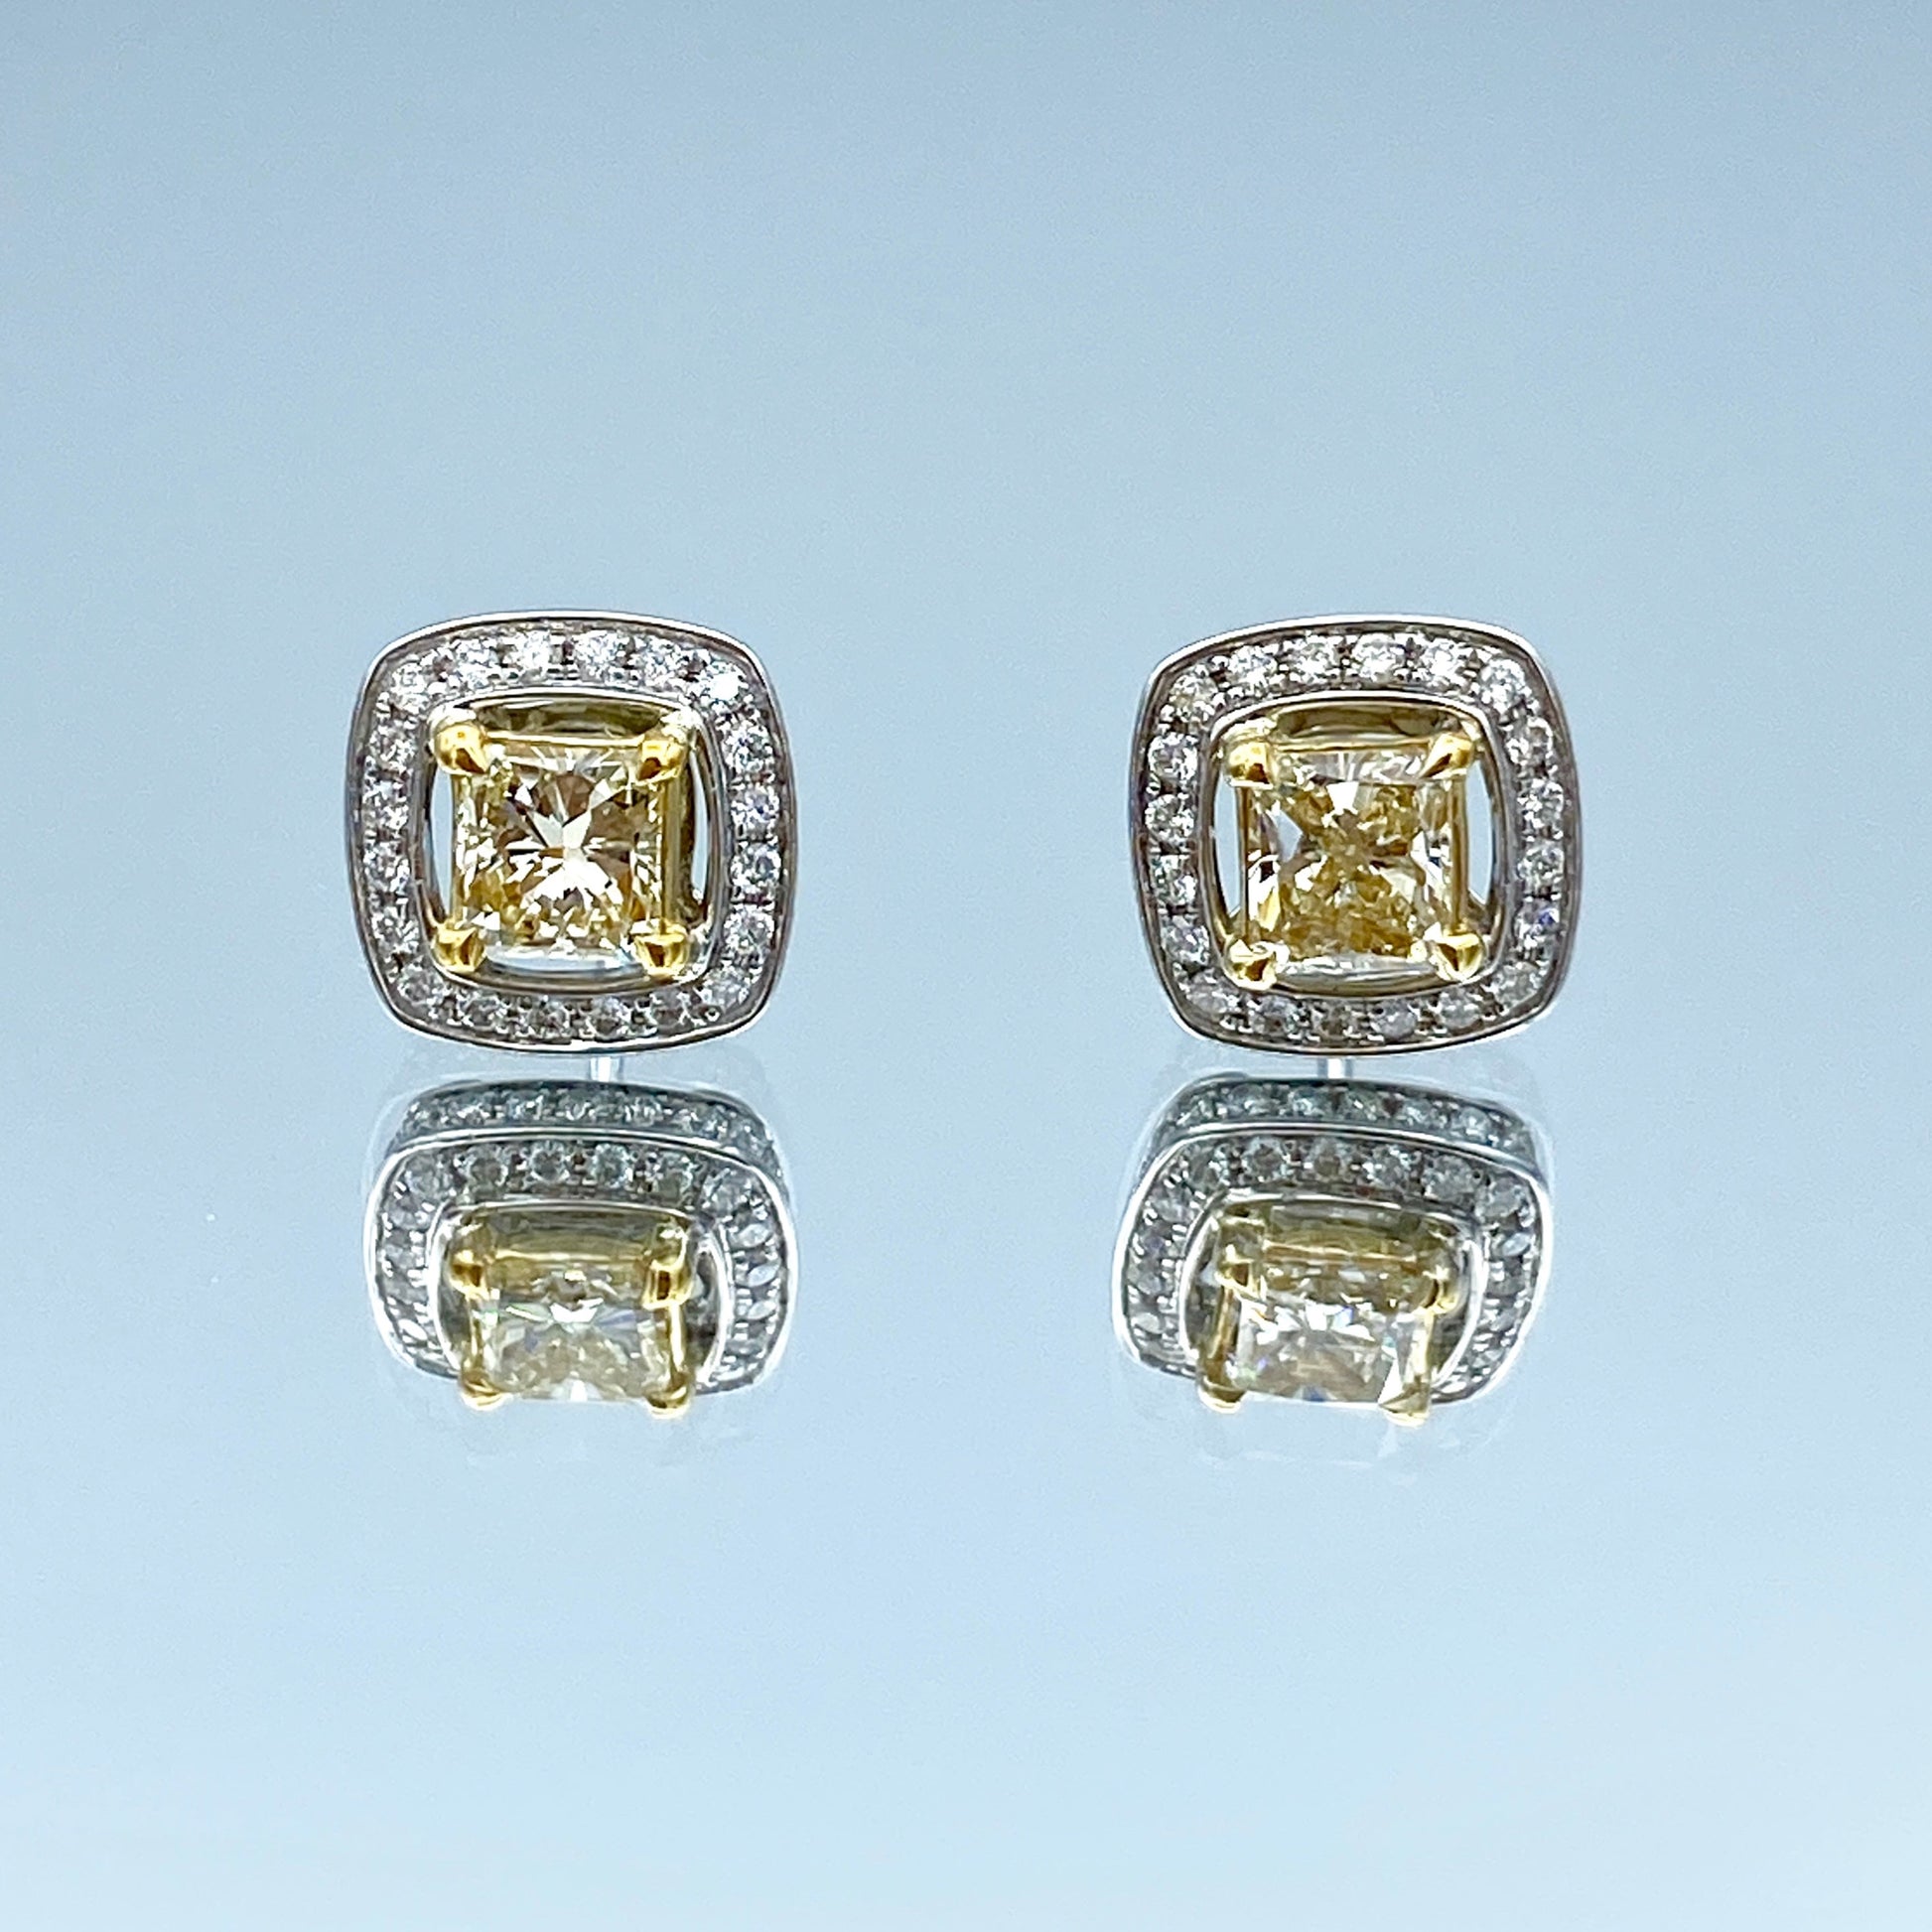 Princess-Cut Yellow Diamond and Round Brilliant-Cut White Diamond Halo Stud Earrings in 14K White Gold - L and L Jewelry